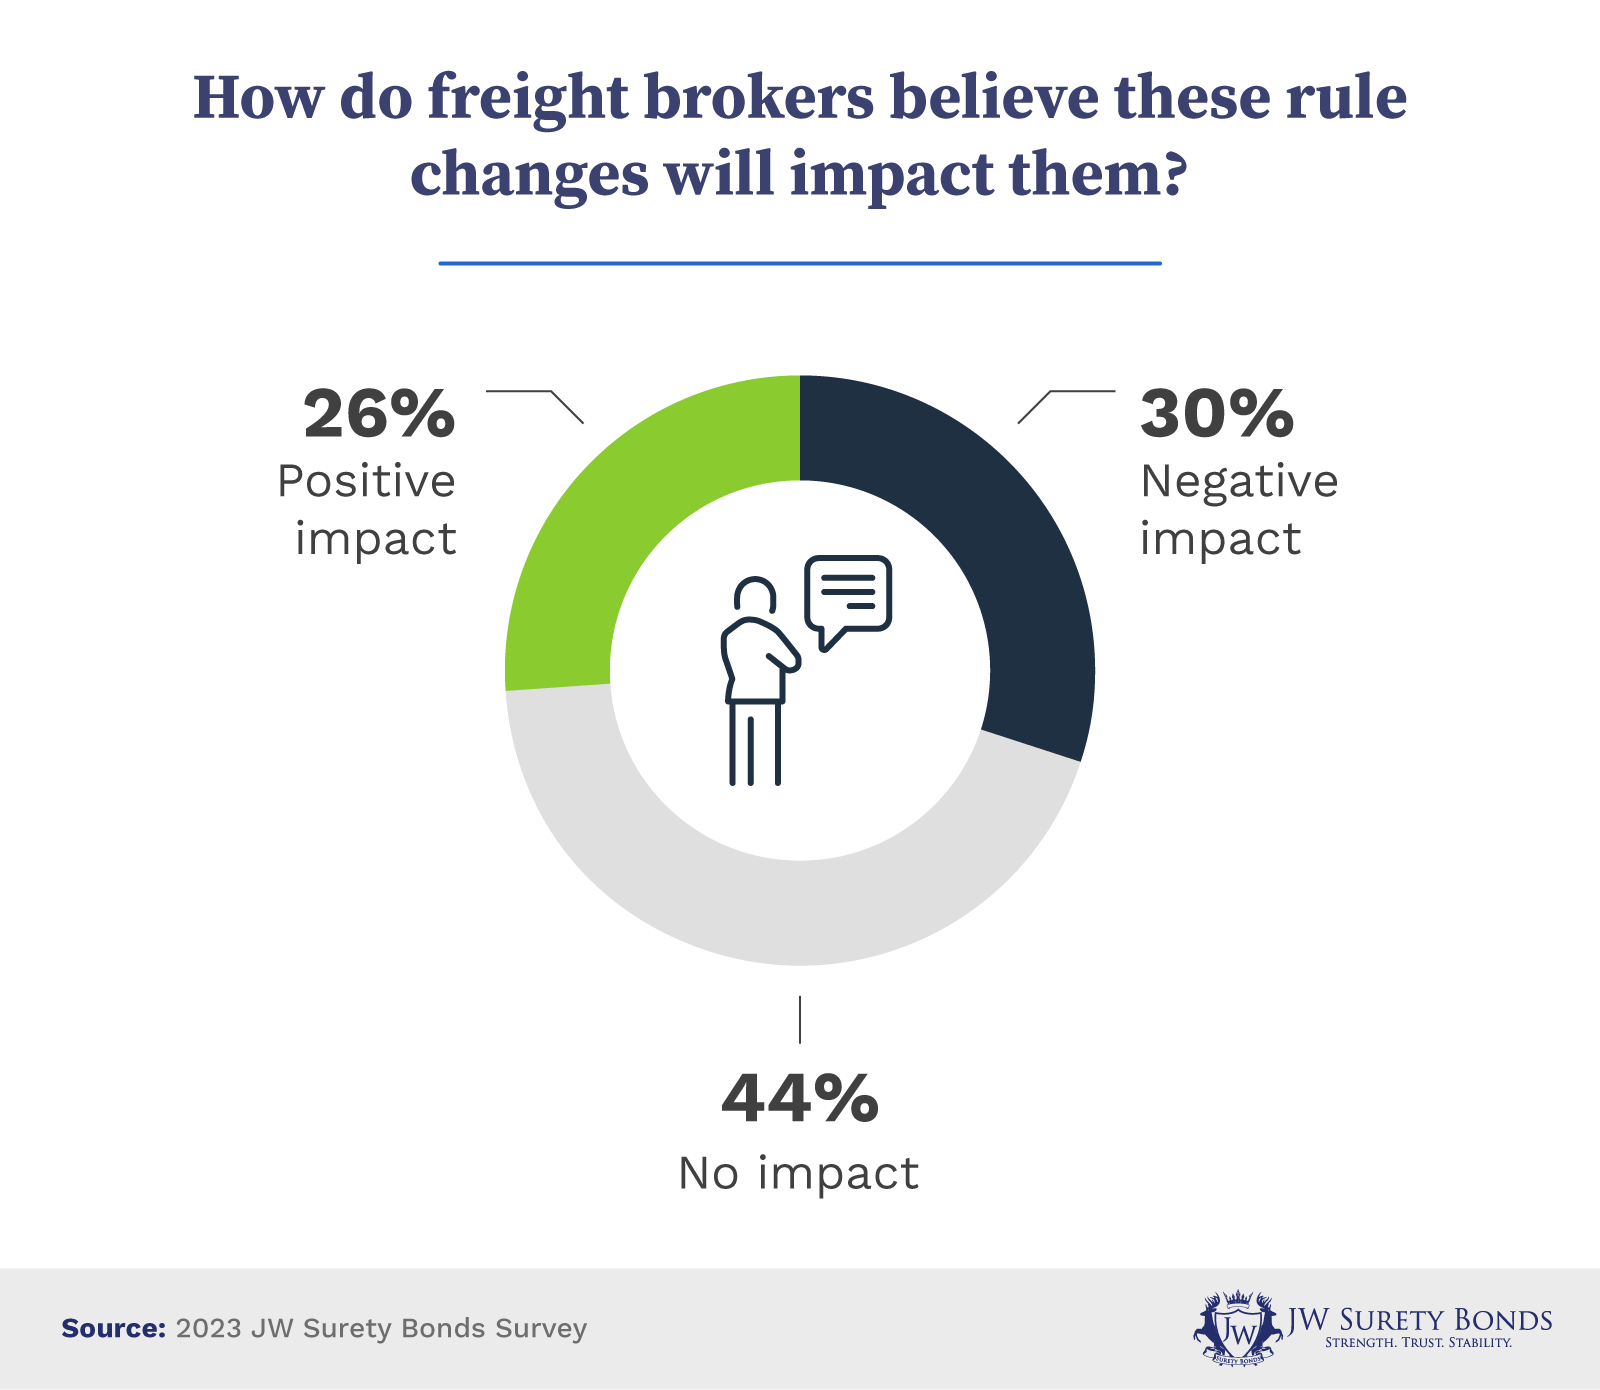 26% of freight brokers believe these rule changes will impact them positively.